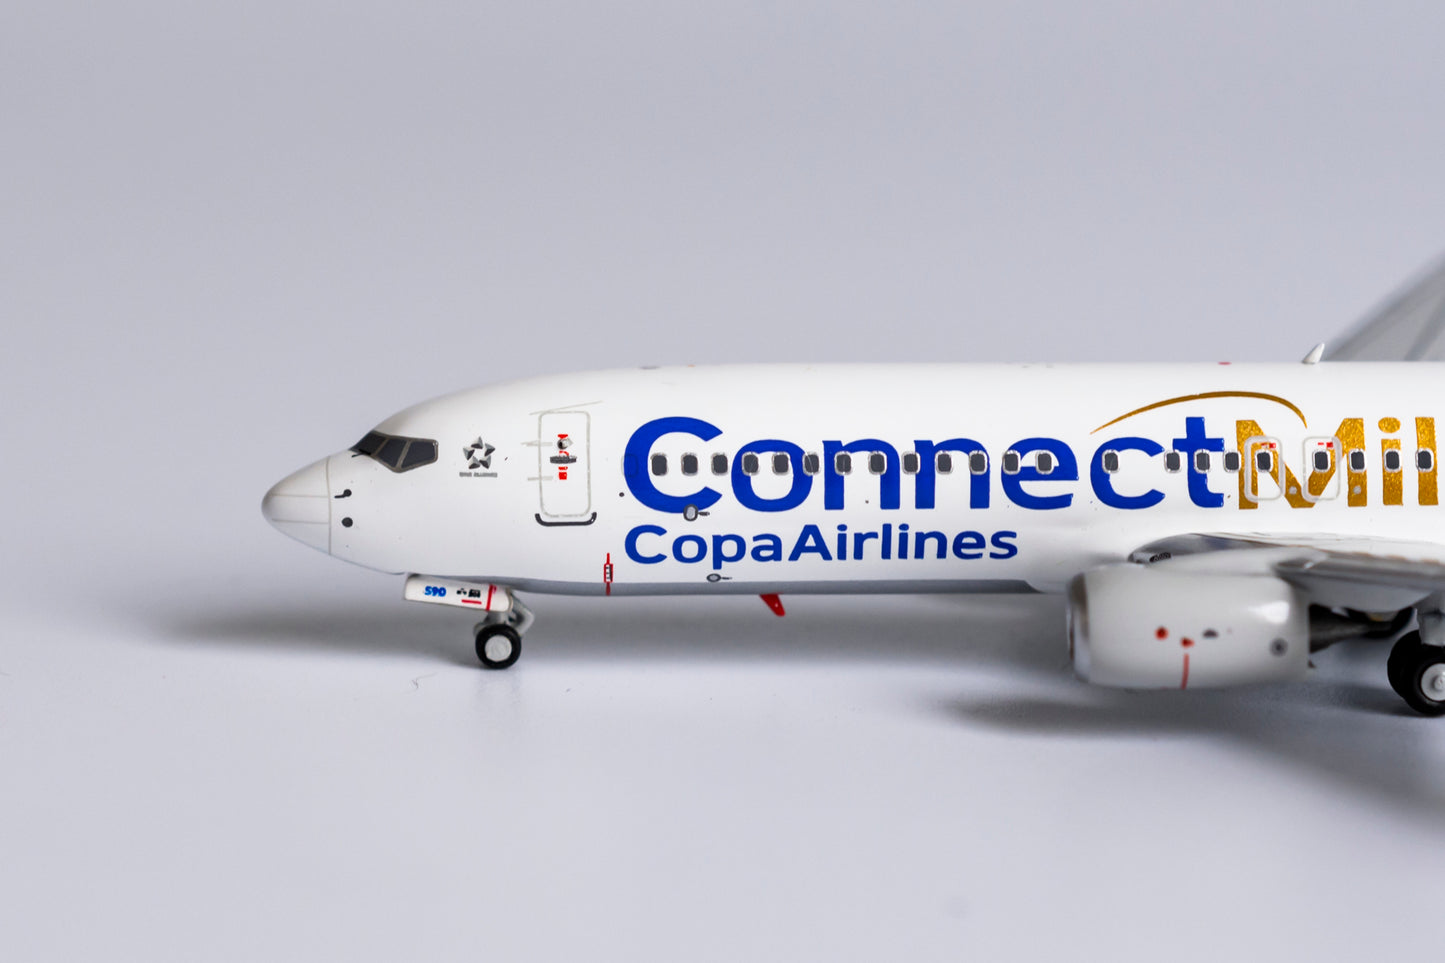 1:400 NG Models Copa Airlines Boeing 737-800 "Split Scimitars, ConnectMiles Livery" HP-1849CMP NG58109